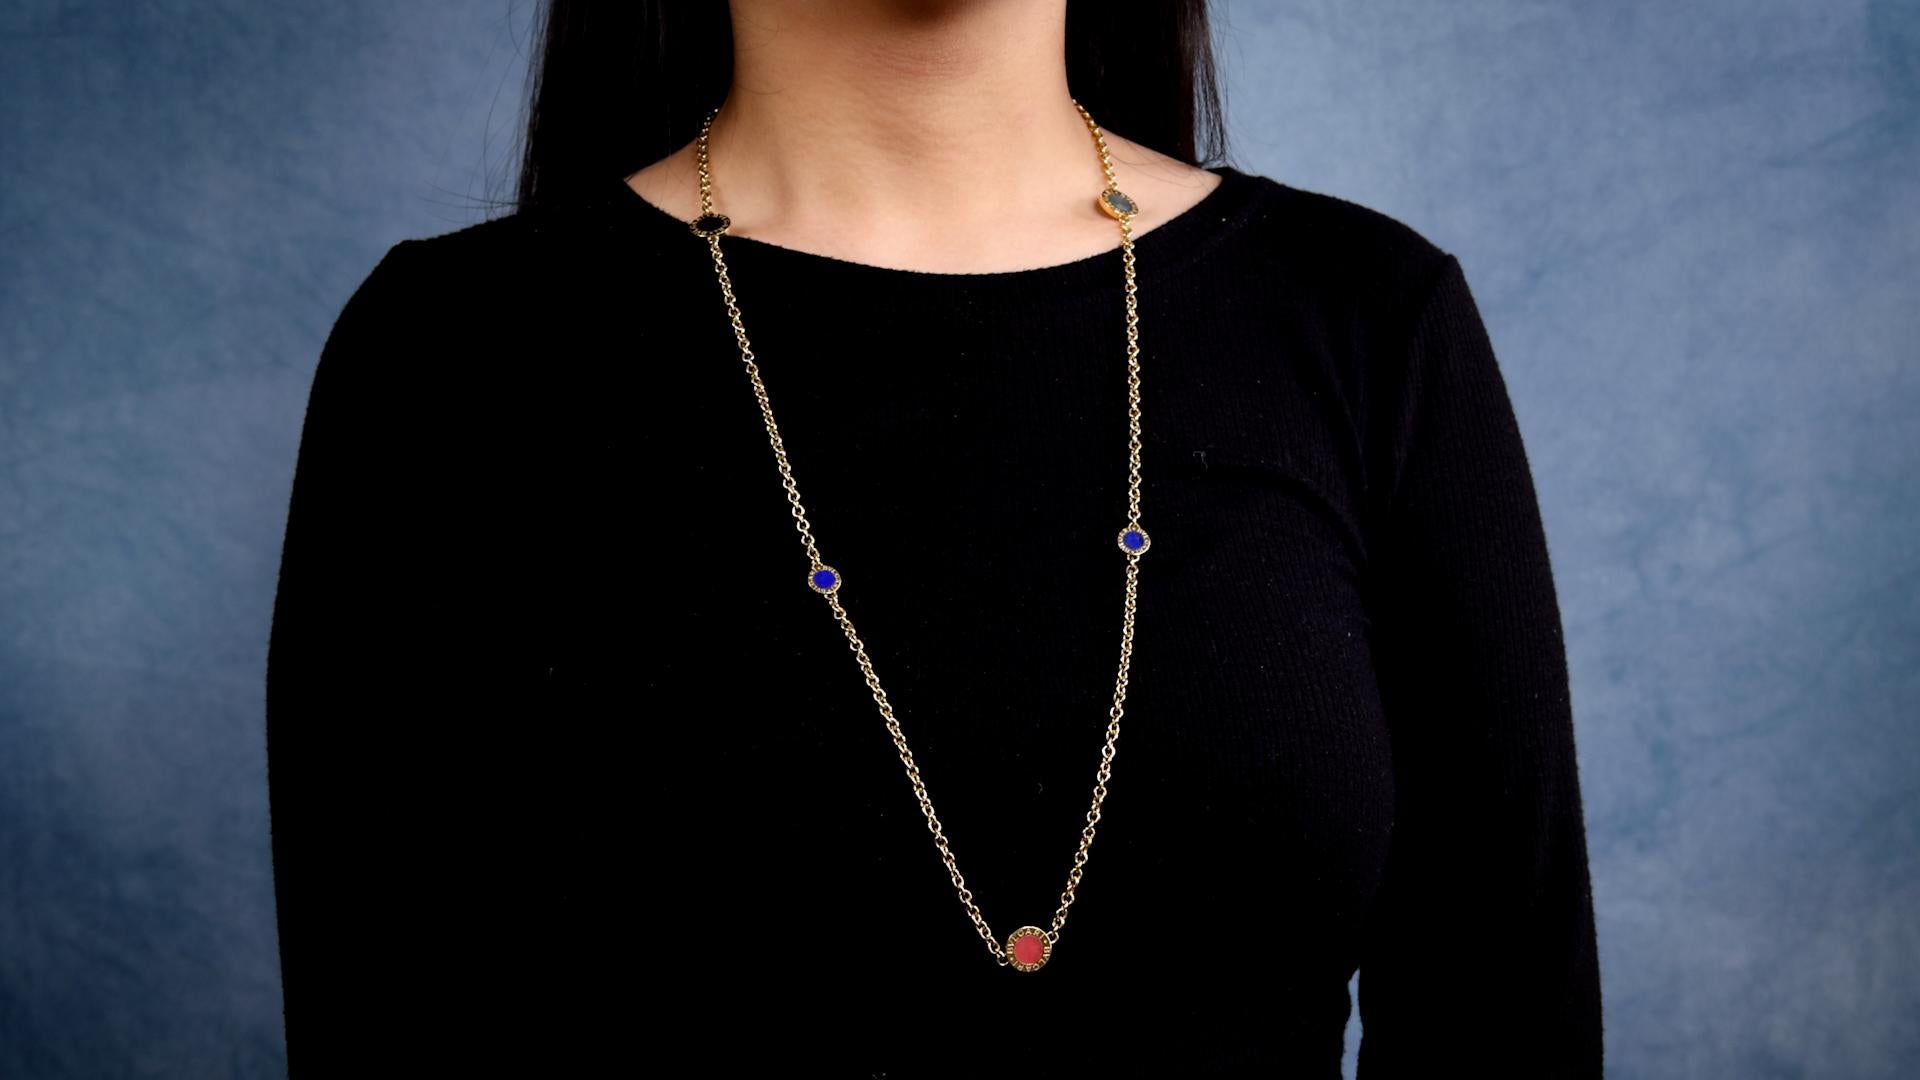 One Vintage Bvlgari Gemstone 18k Yellow Gold Disc Necklace. Featuring lapis lazuli, onyx, coral, and agate. Crafted in 18 karat yellow gold signed Bvlgari with Italian hallmarks, weighing 39.83 grams. Circa 2000. The necklace is 31 inches in